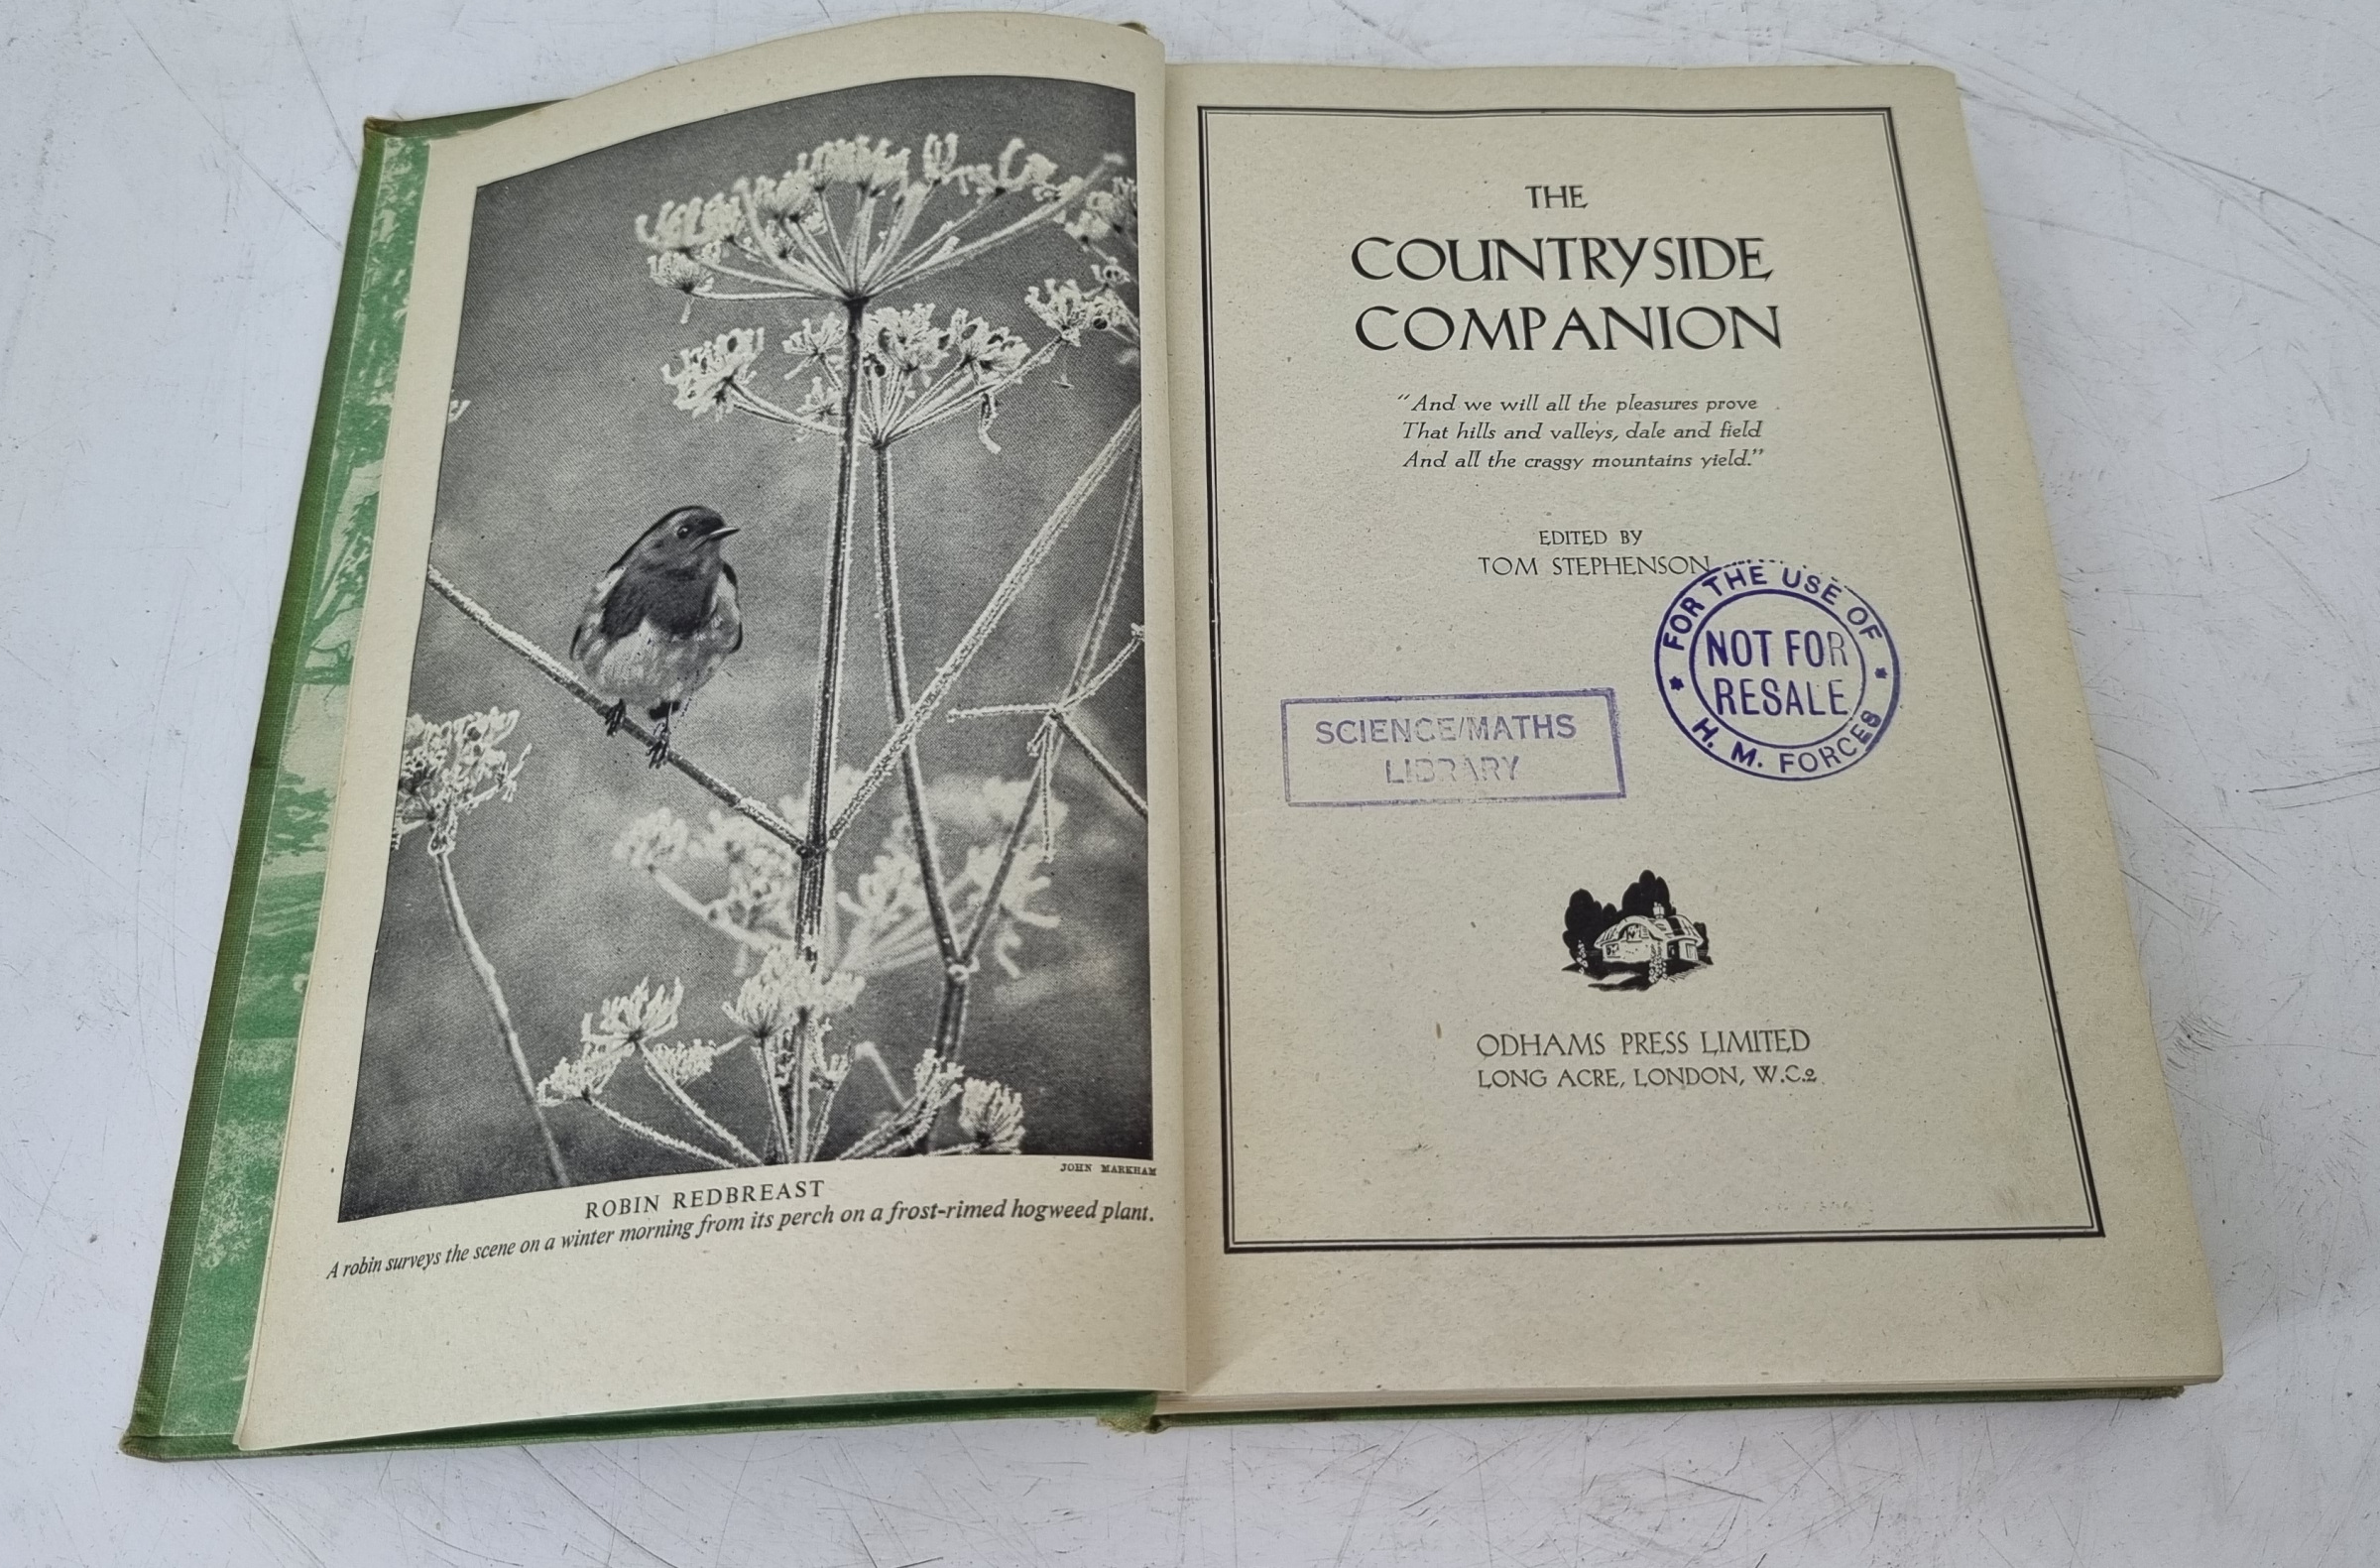 The Good Earth by Pearl S Buck - Published Norwich 1955, The Countryside Companion by Tom Stephenson - Image 3 of 13